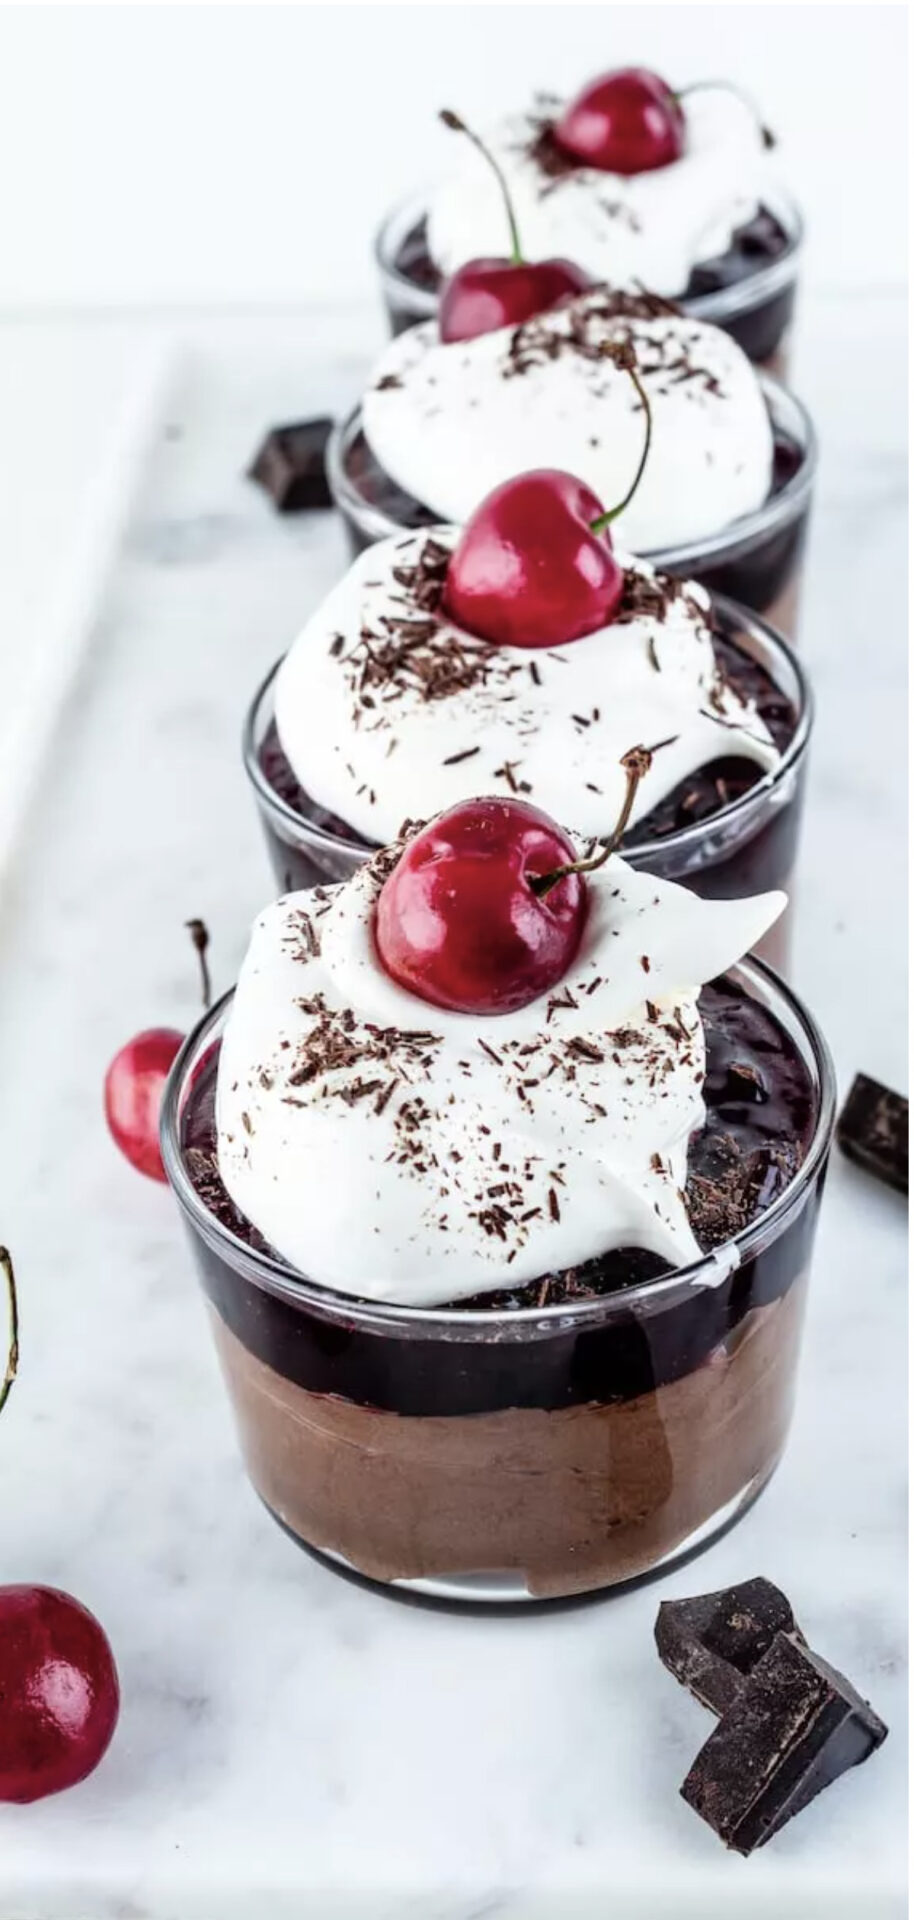 Four chocolate cherry mousse cups with cherries on top are a festive no-bake dessert